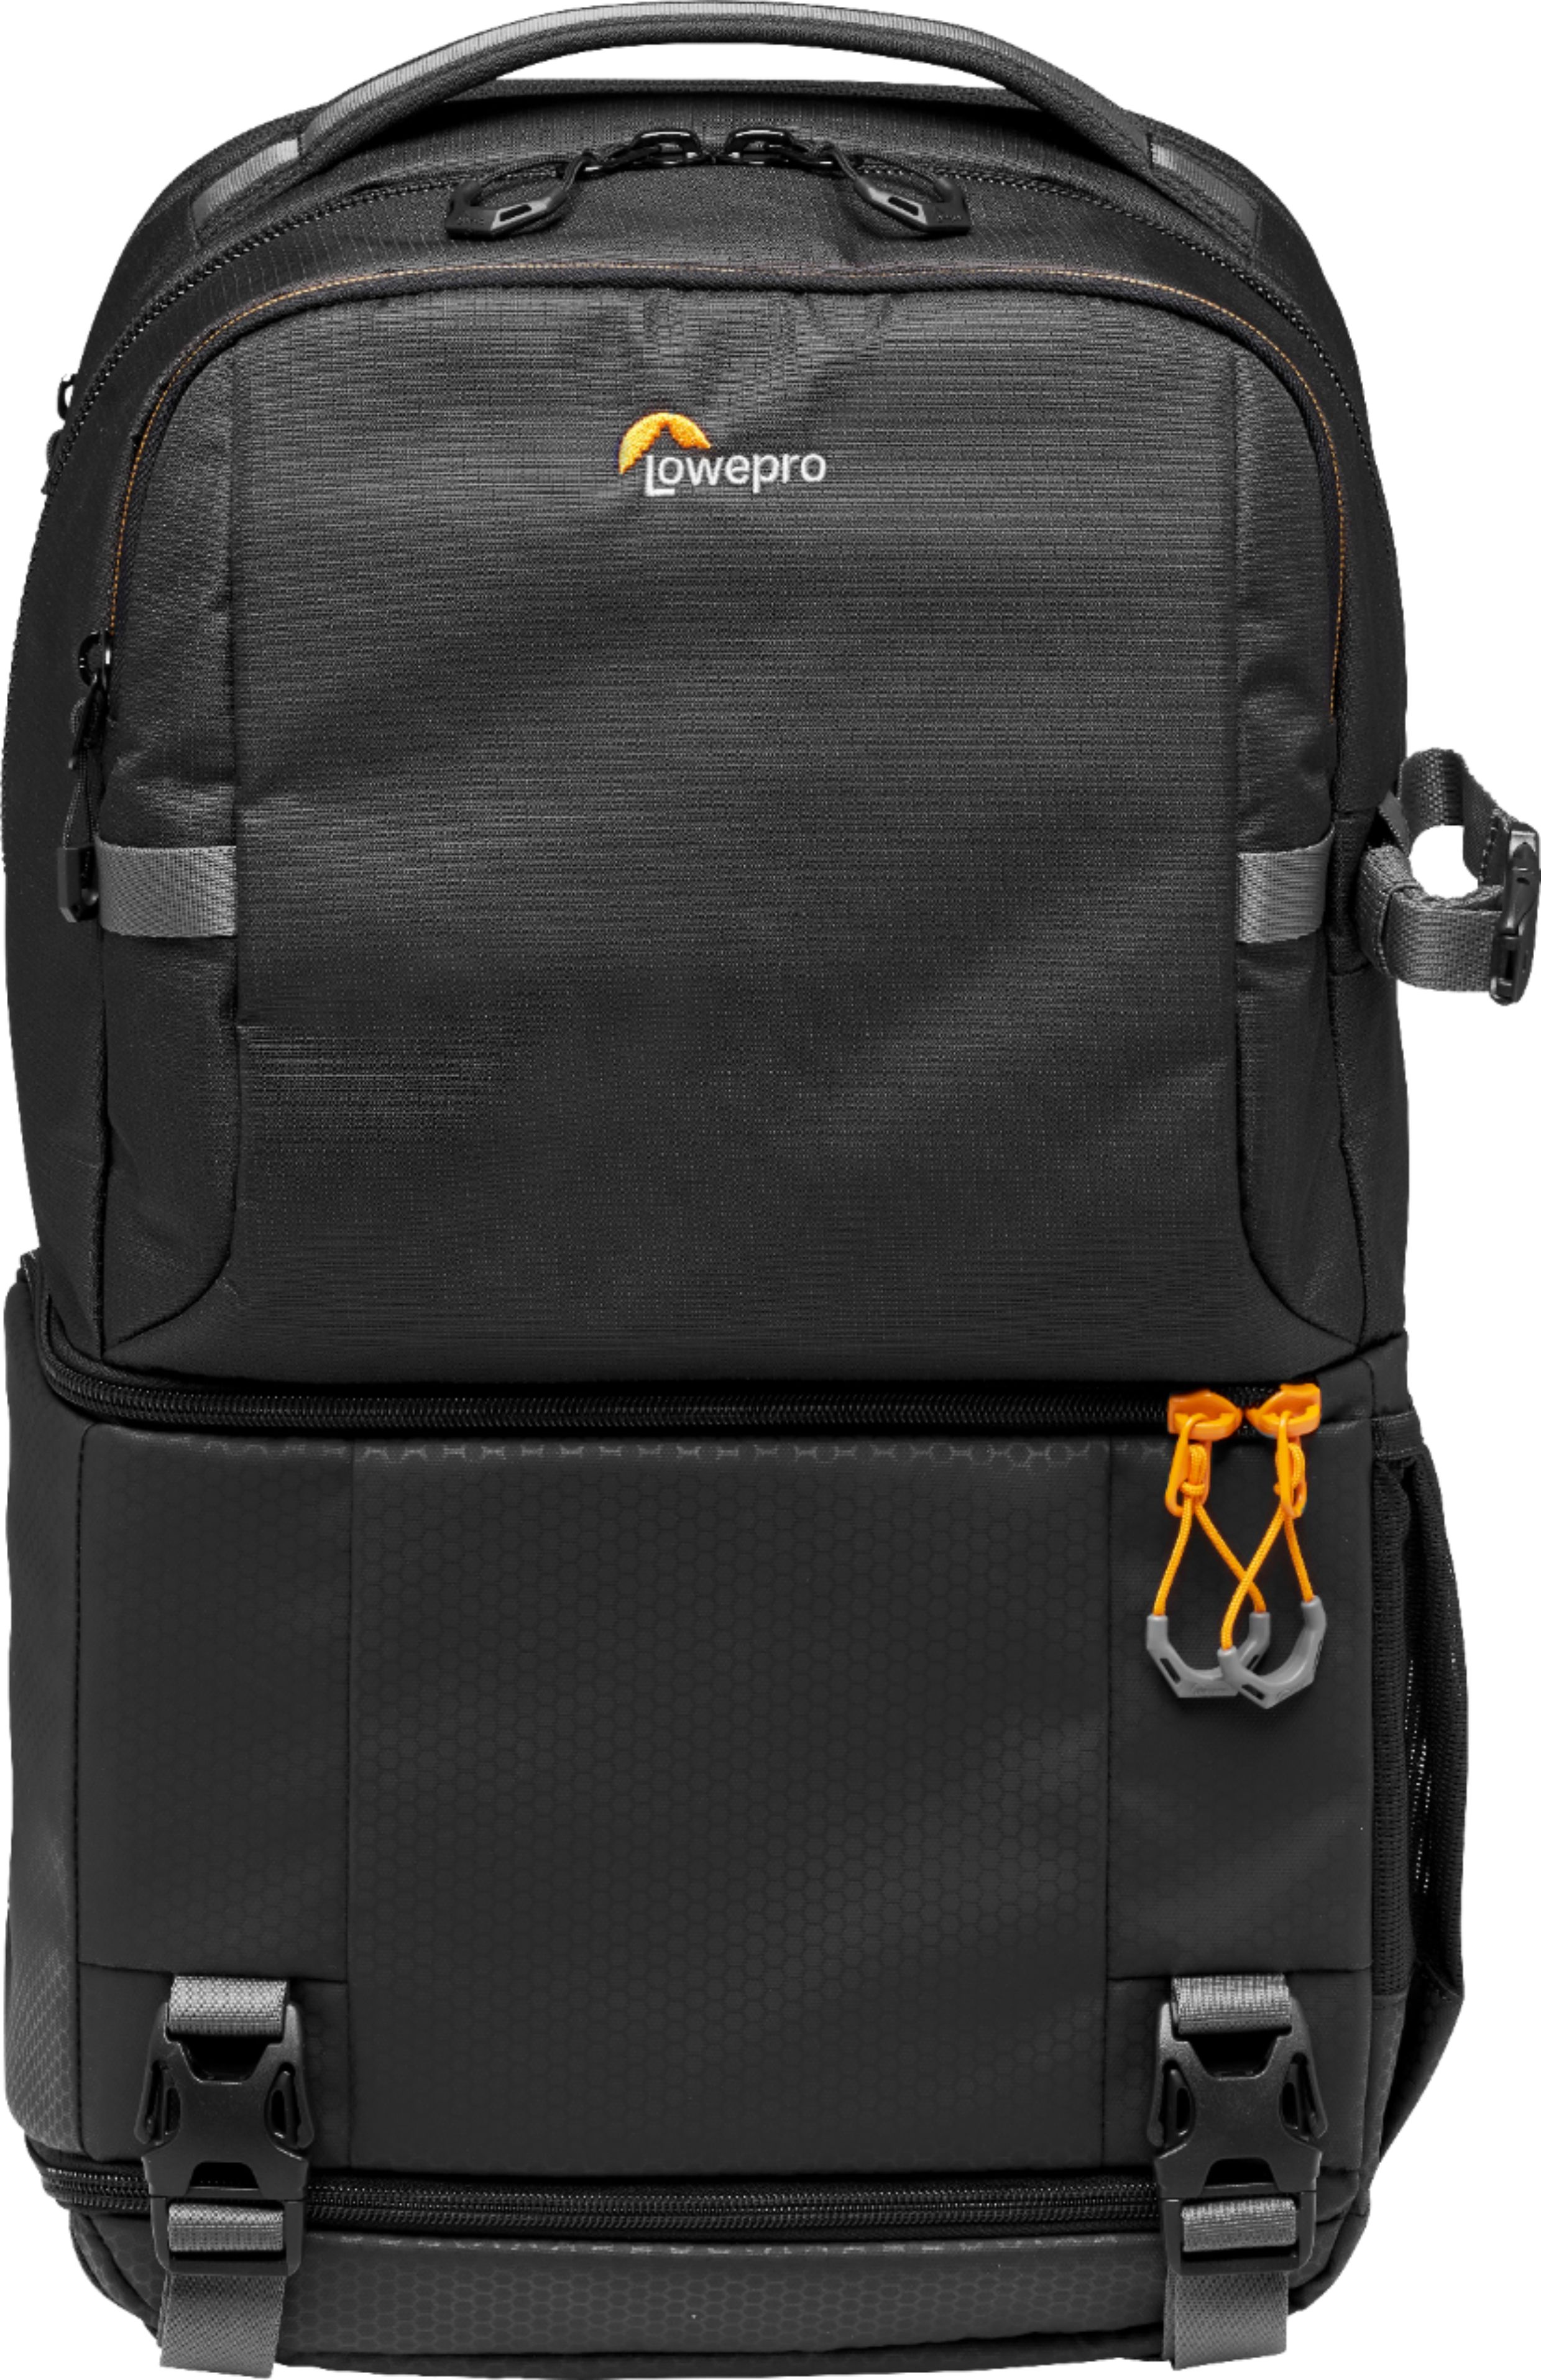 Angle View: Lowepro - Fastpack Camera Backpack - Black